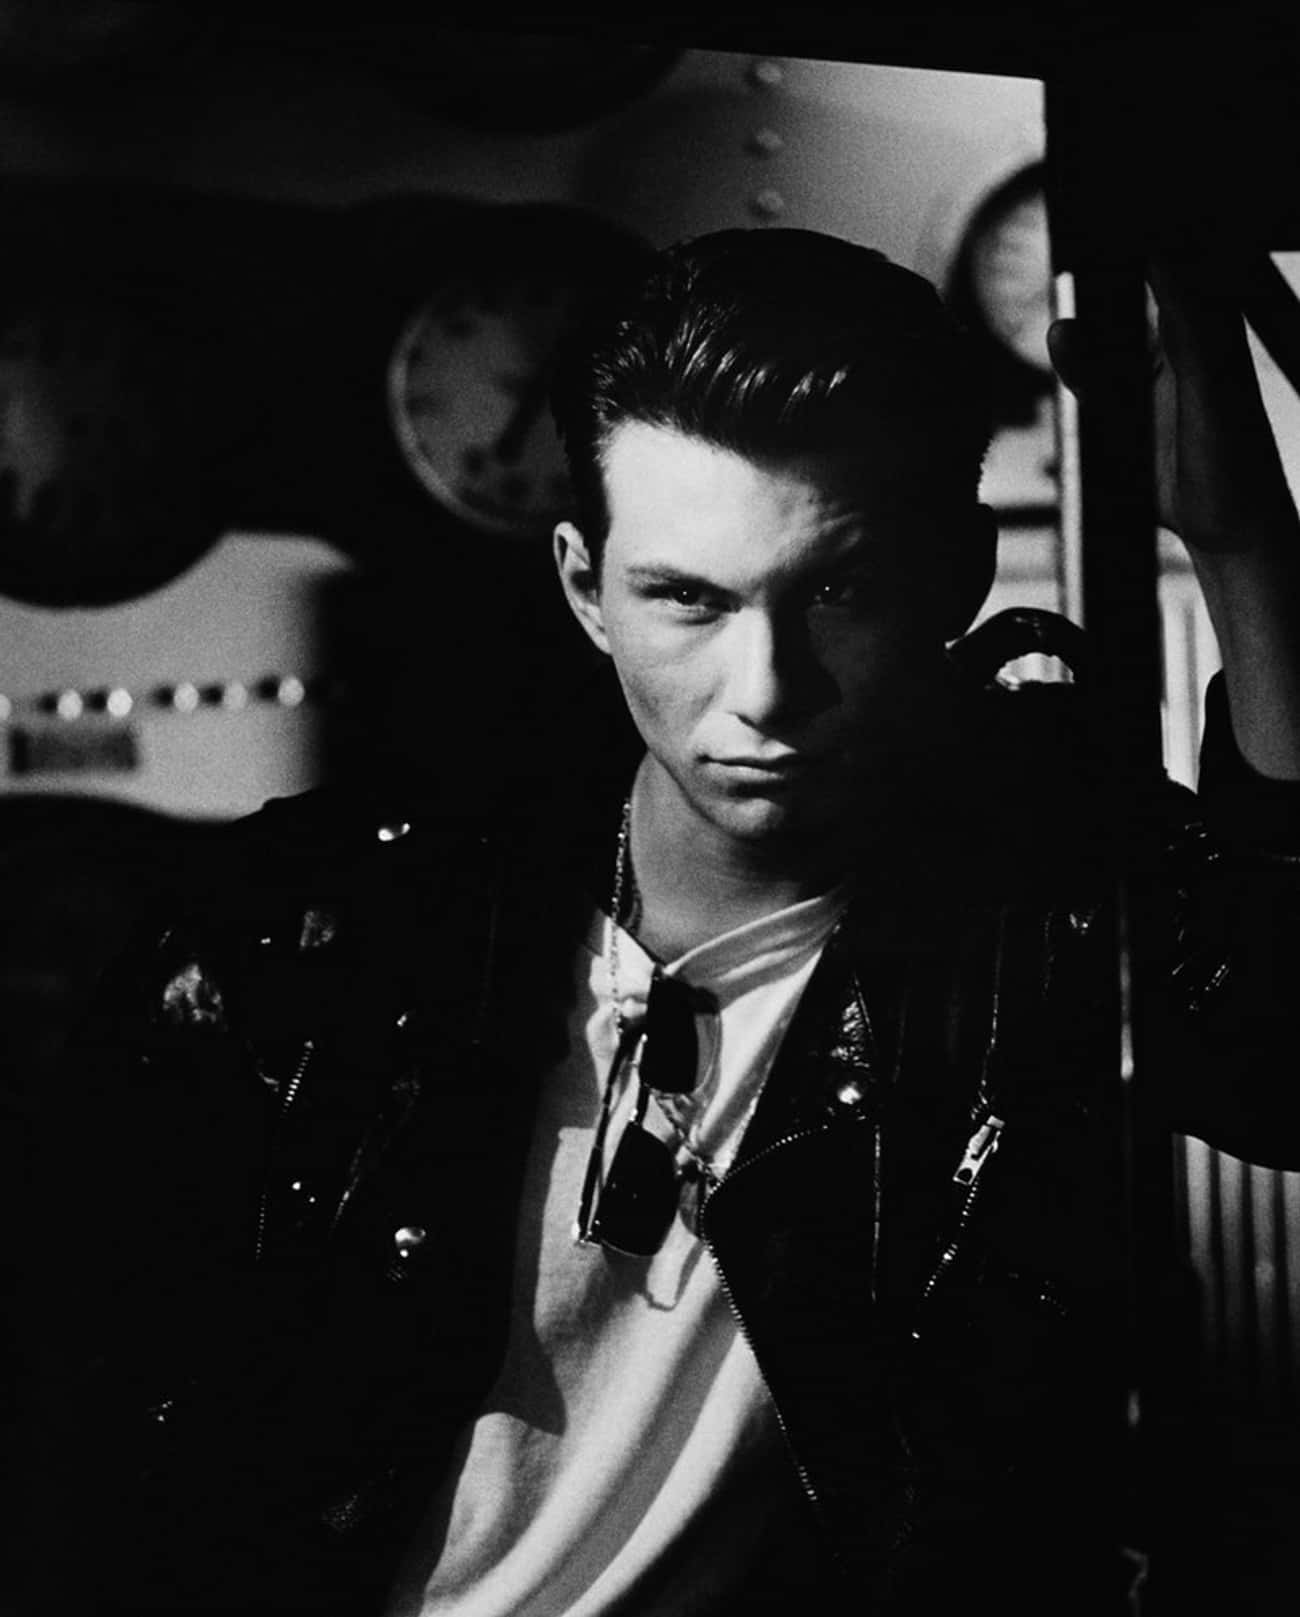 Young Christian Slater in Black Leather Jacket and White T-Shirt